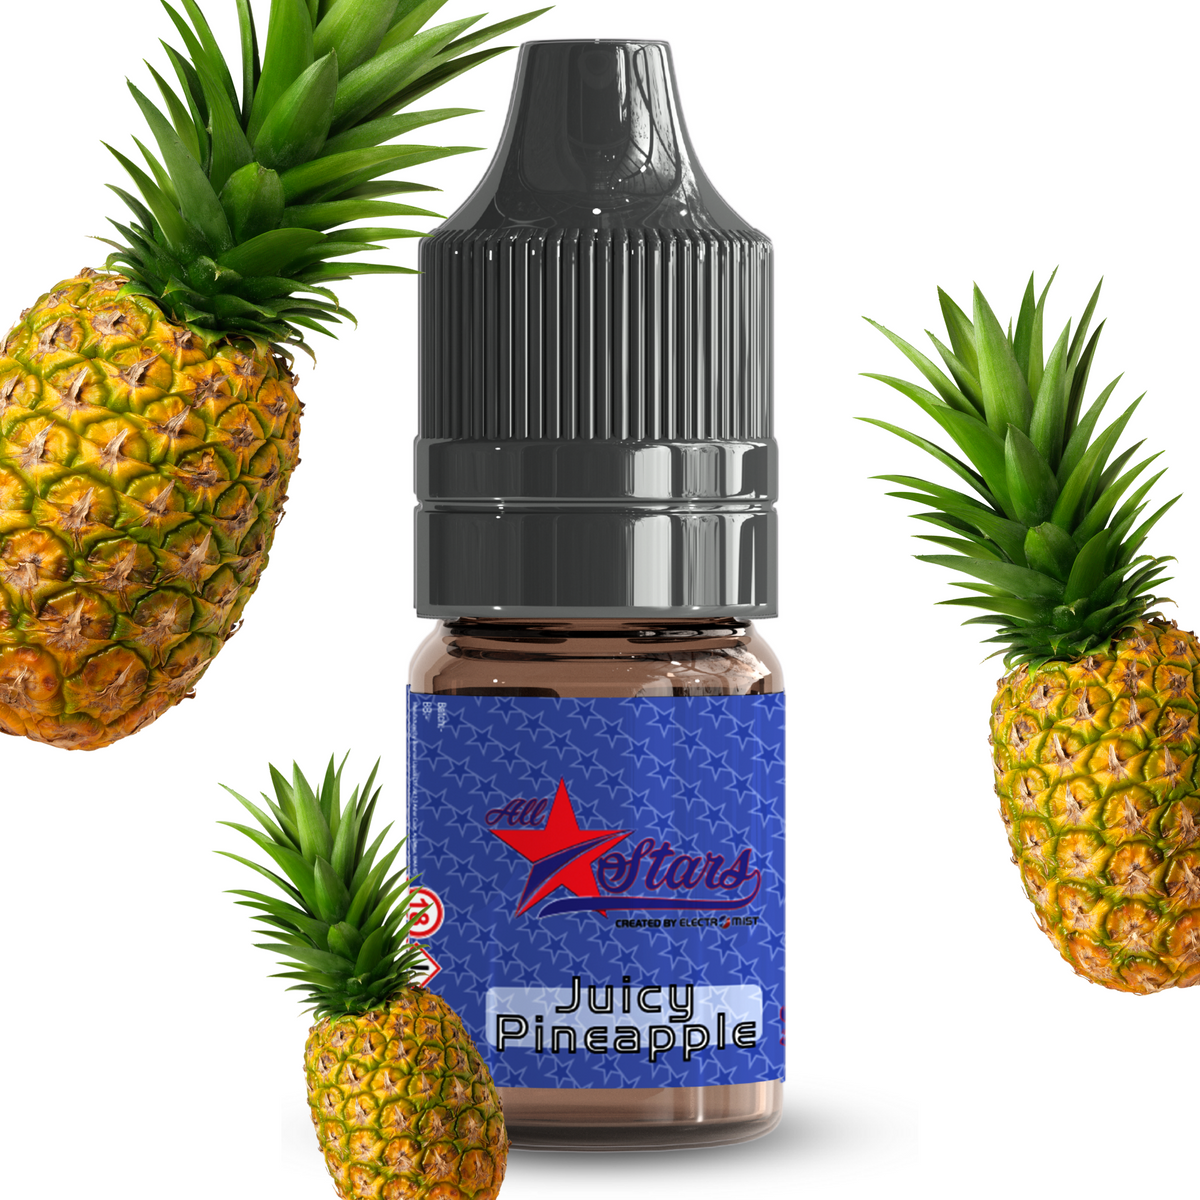 All Stars E-Liquid from the vape brand you can trust, Electromist, . Get your taste buds ready for a flavour sensation, Juicy Pineapple. Nicotine Content: 6mg/12mg/18mg Products may contain nicotine. For over 18s Only ejuice, vape pen, eliquid, e cigarette, 10ml, vaping, cloud, PG, VG, 60/40, vape liquid, Flavour, TPD